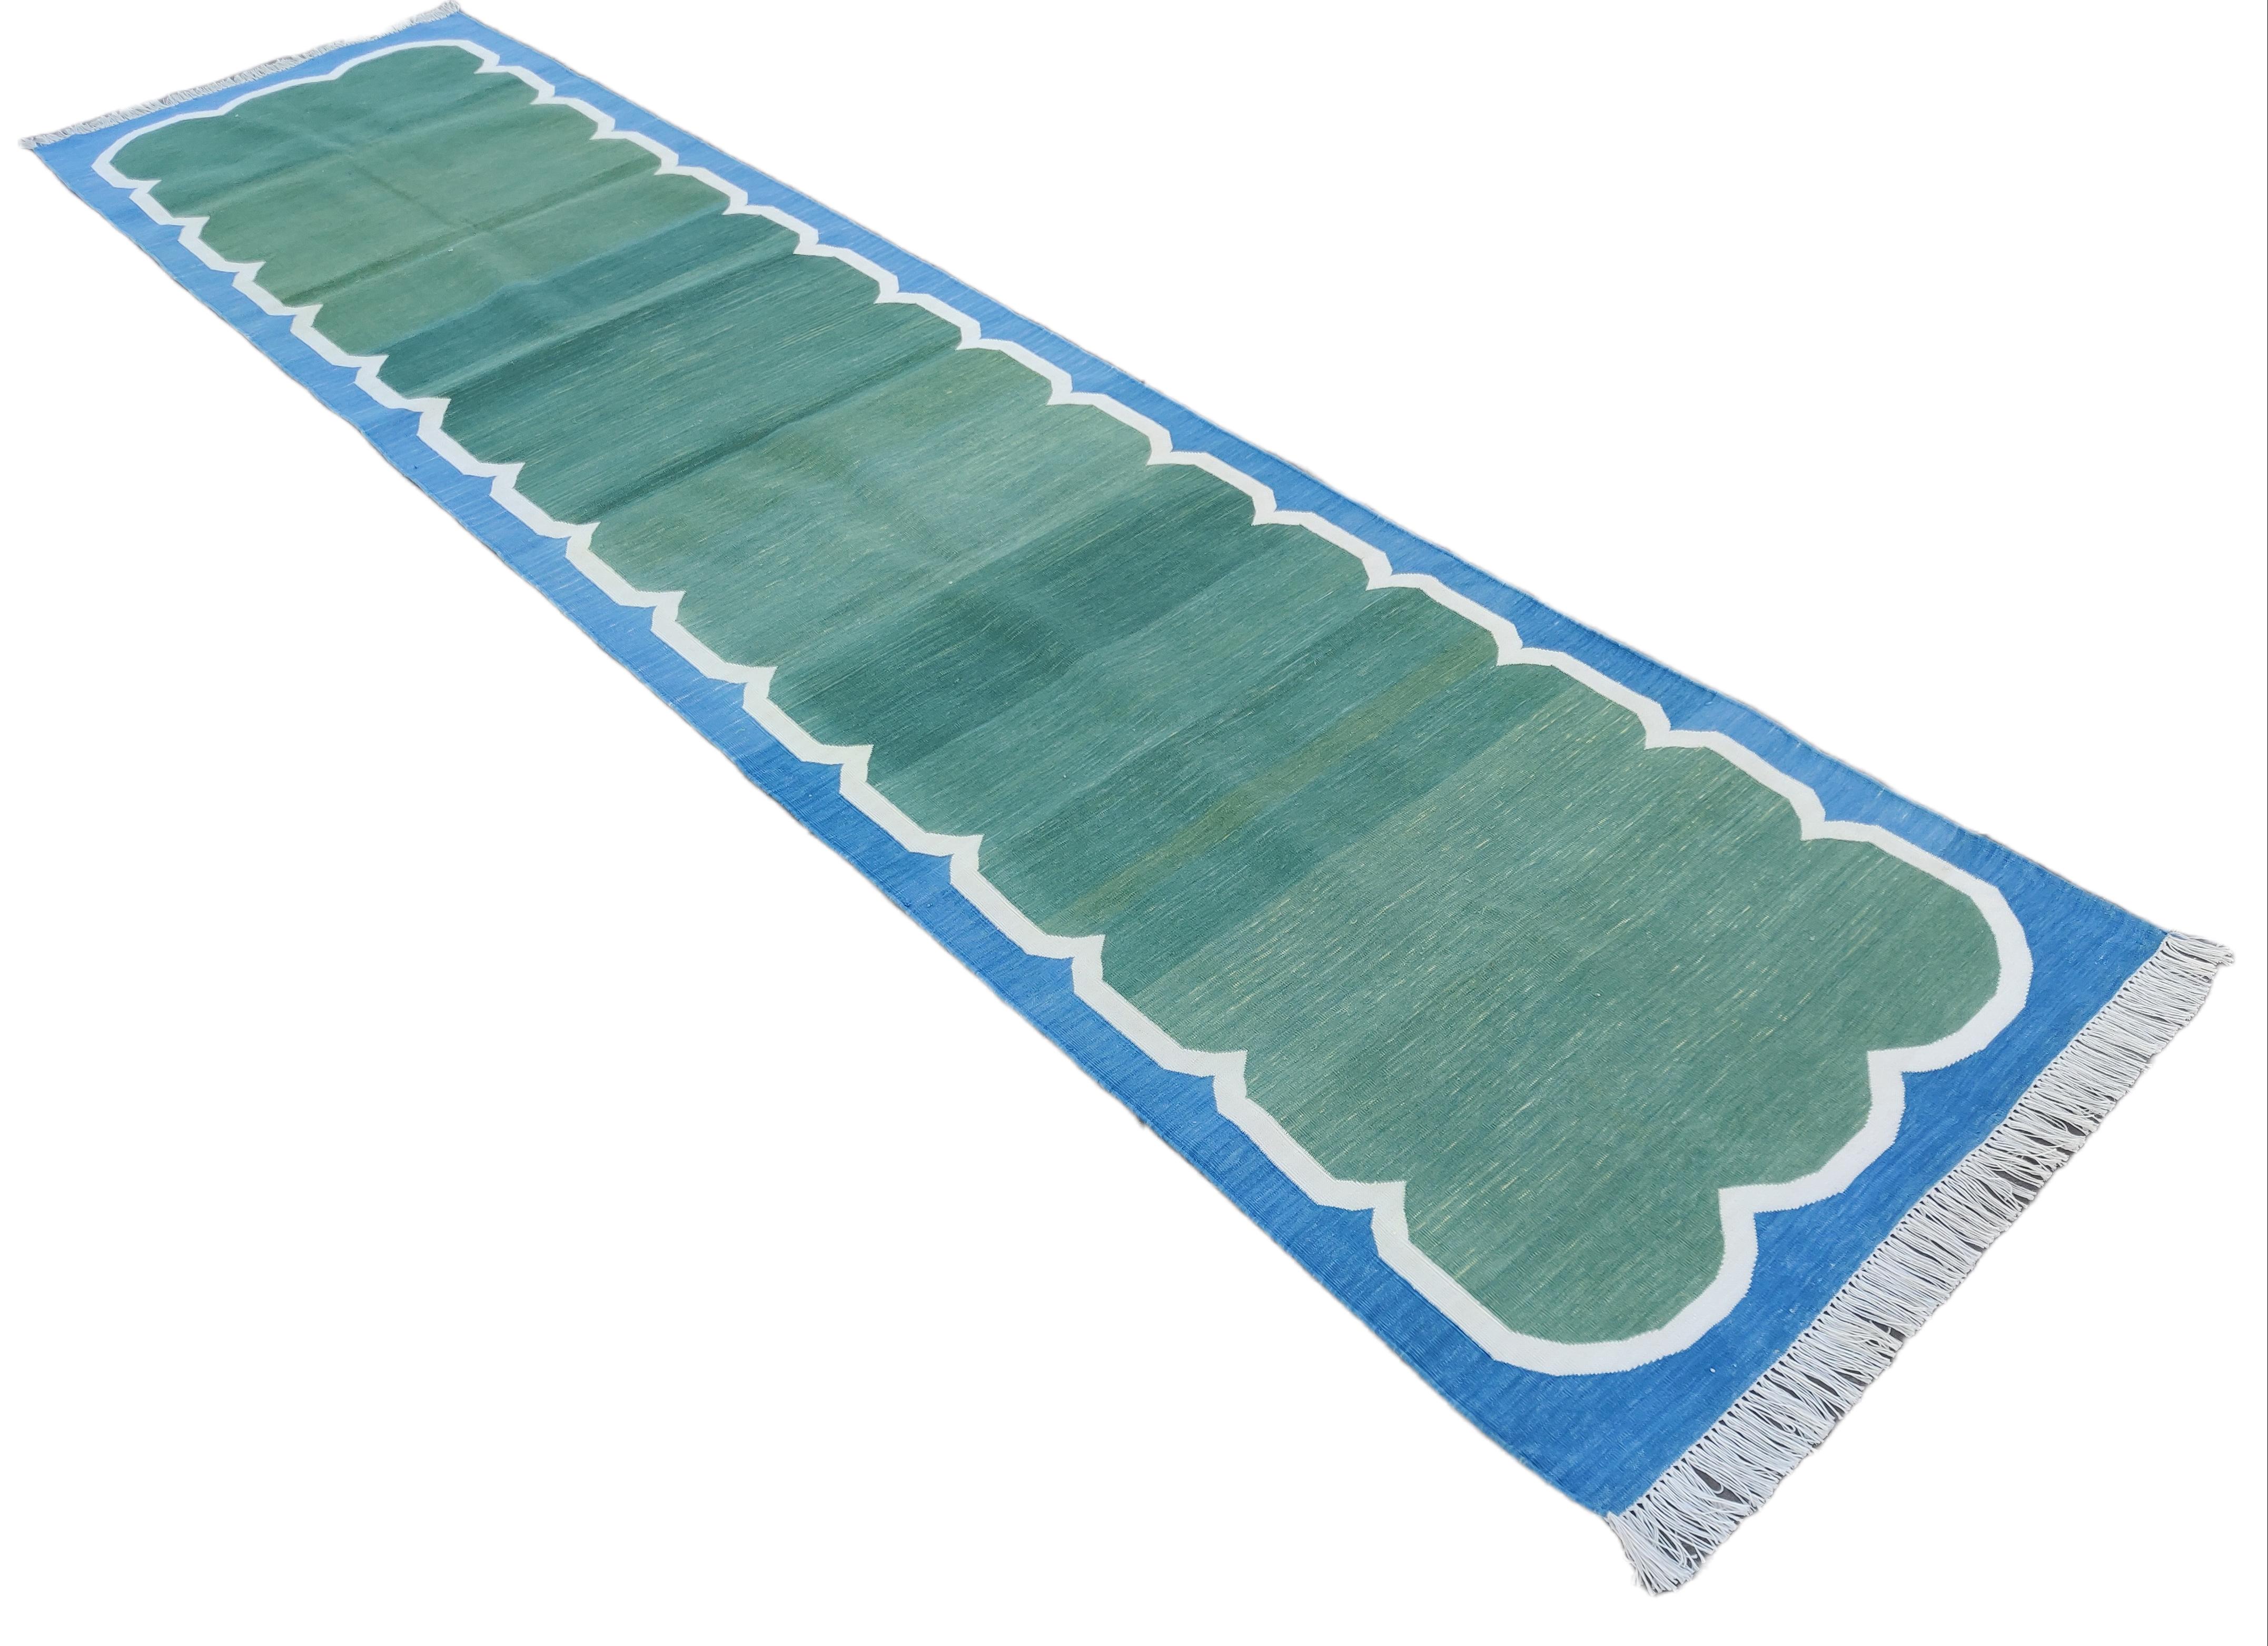 Cotton Natural Vegetable Dyed, Forest Green And Blue Scalloped Indian Dhurrie Runner-3'x12'
These special flat-weave dhurries are hand-woven with 15 ply 100% cotton yarn. Due to the special manufacturing techniques used to create our rugs, the size